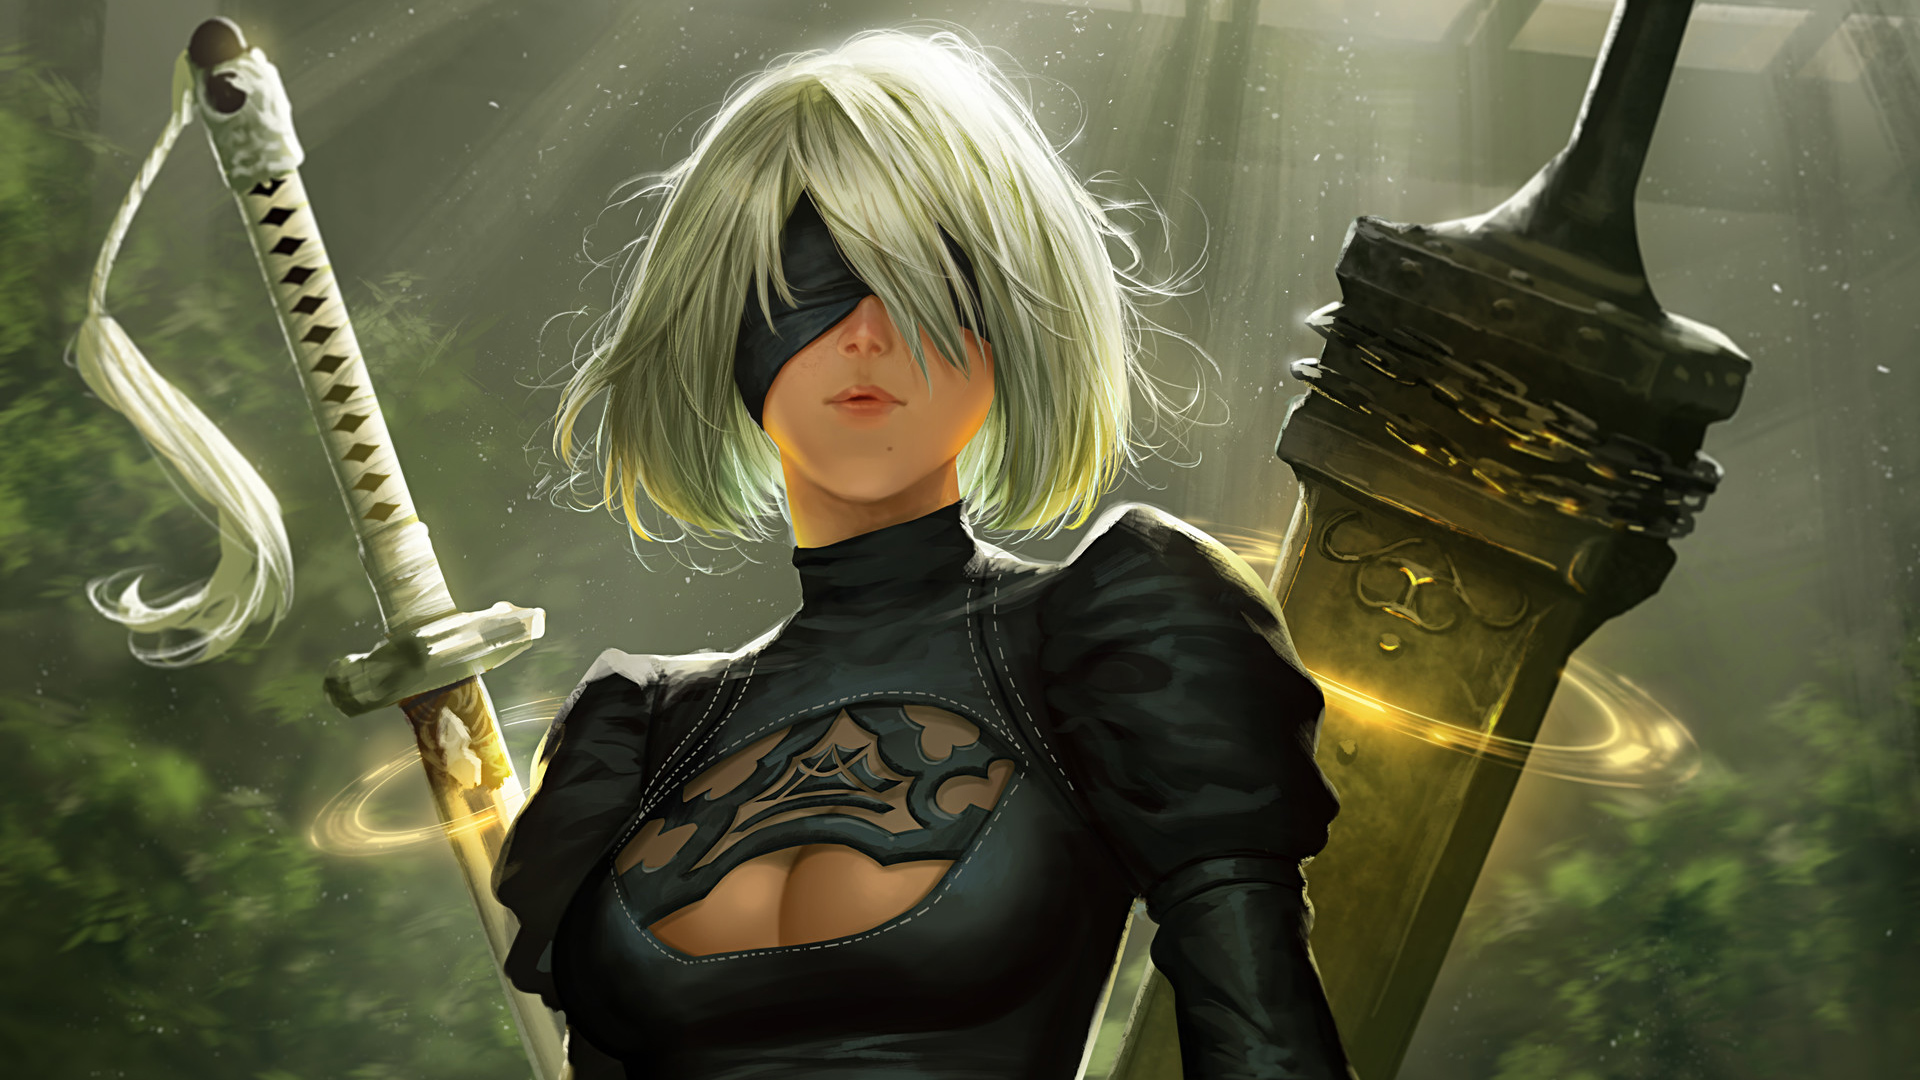 2B NieR Automata Fan Art, HD Games, 4k Wallpapers, Images, Backgrounds, Photos and Pictures